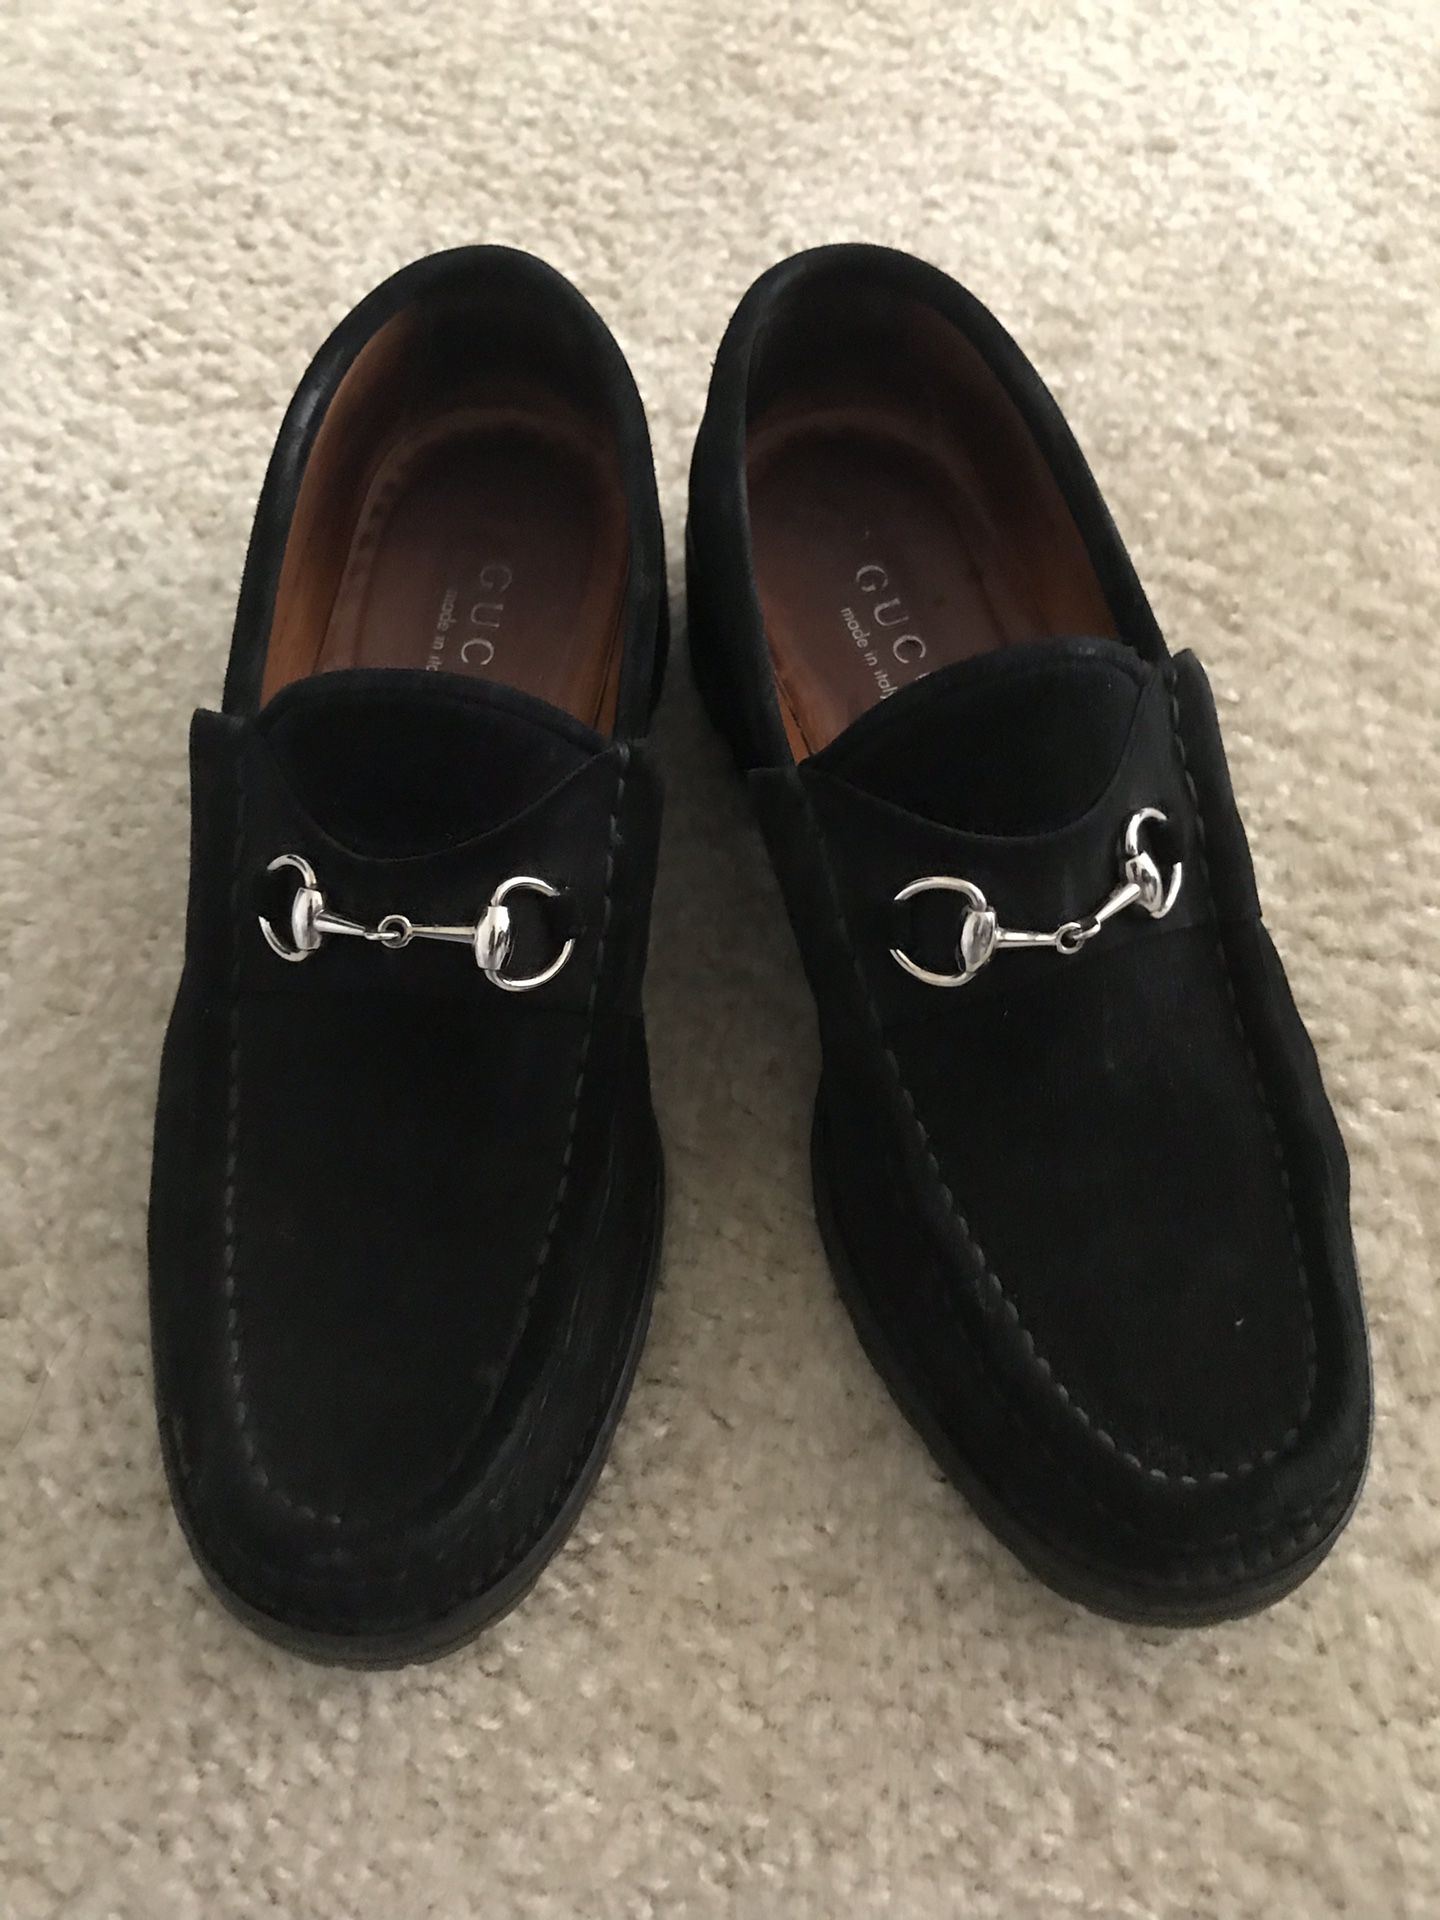 Gucci women black suede iconic luxury loafers 7.5